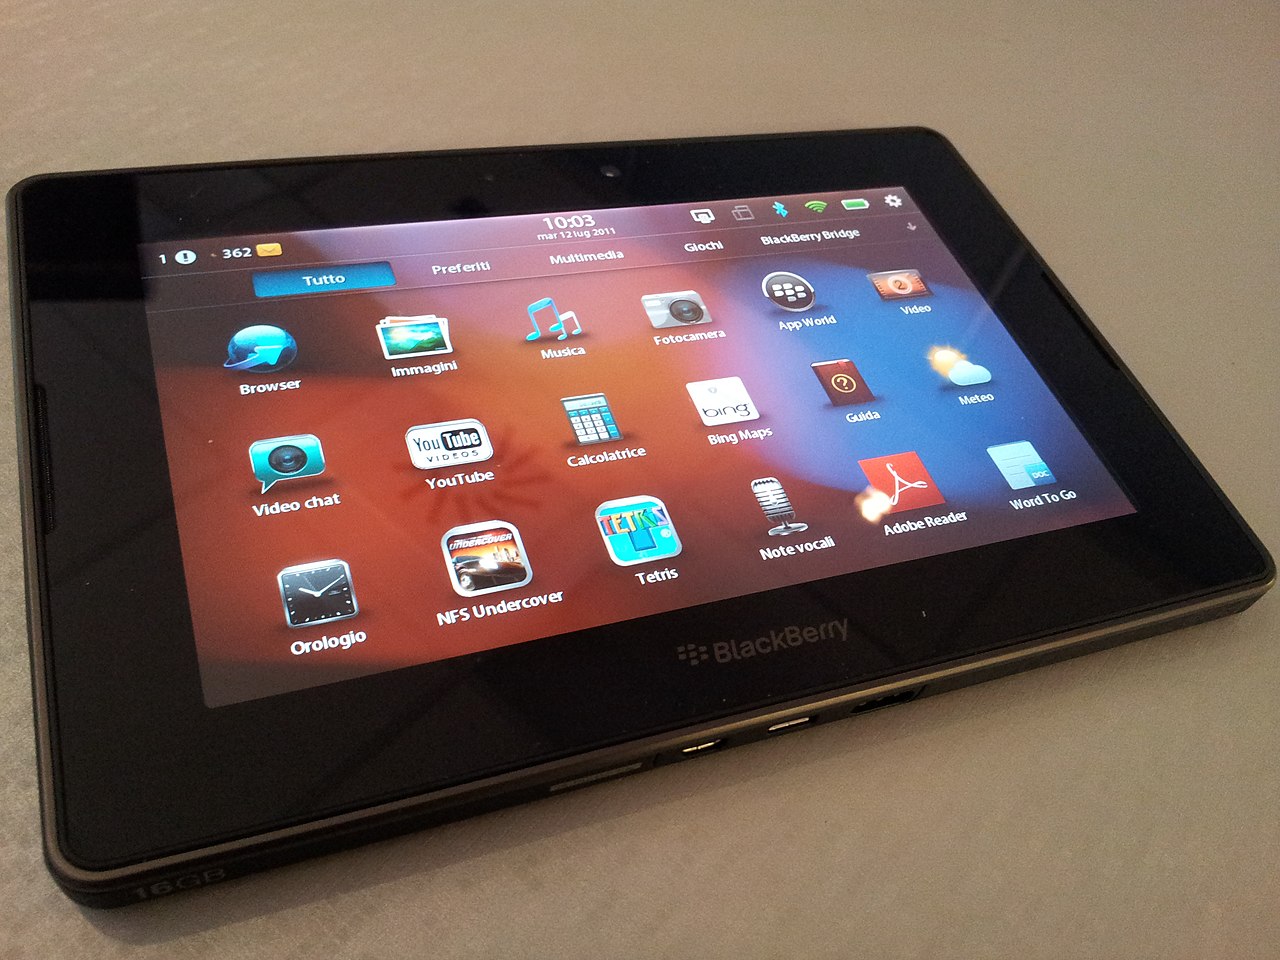 Image of a Blackberry Playbook